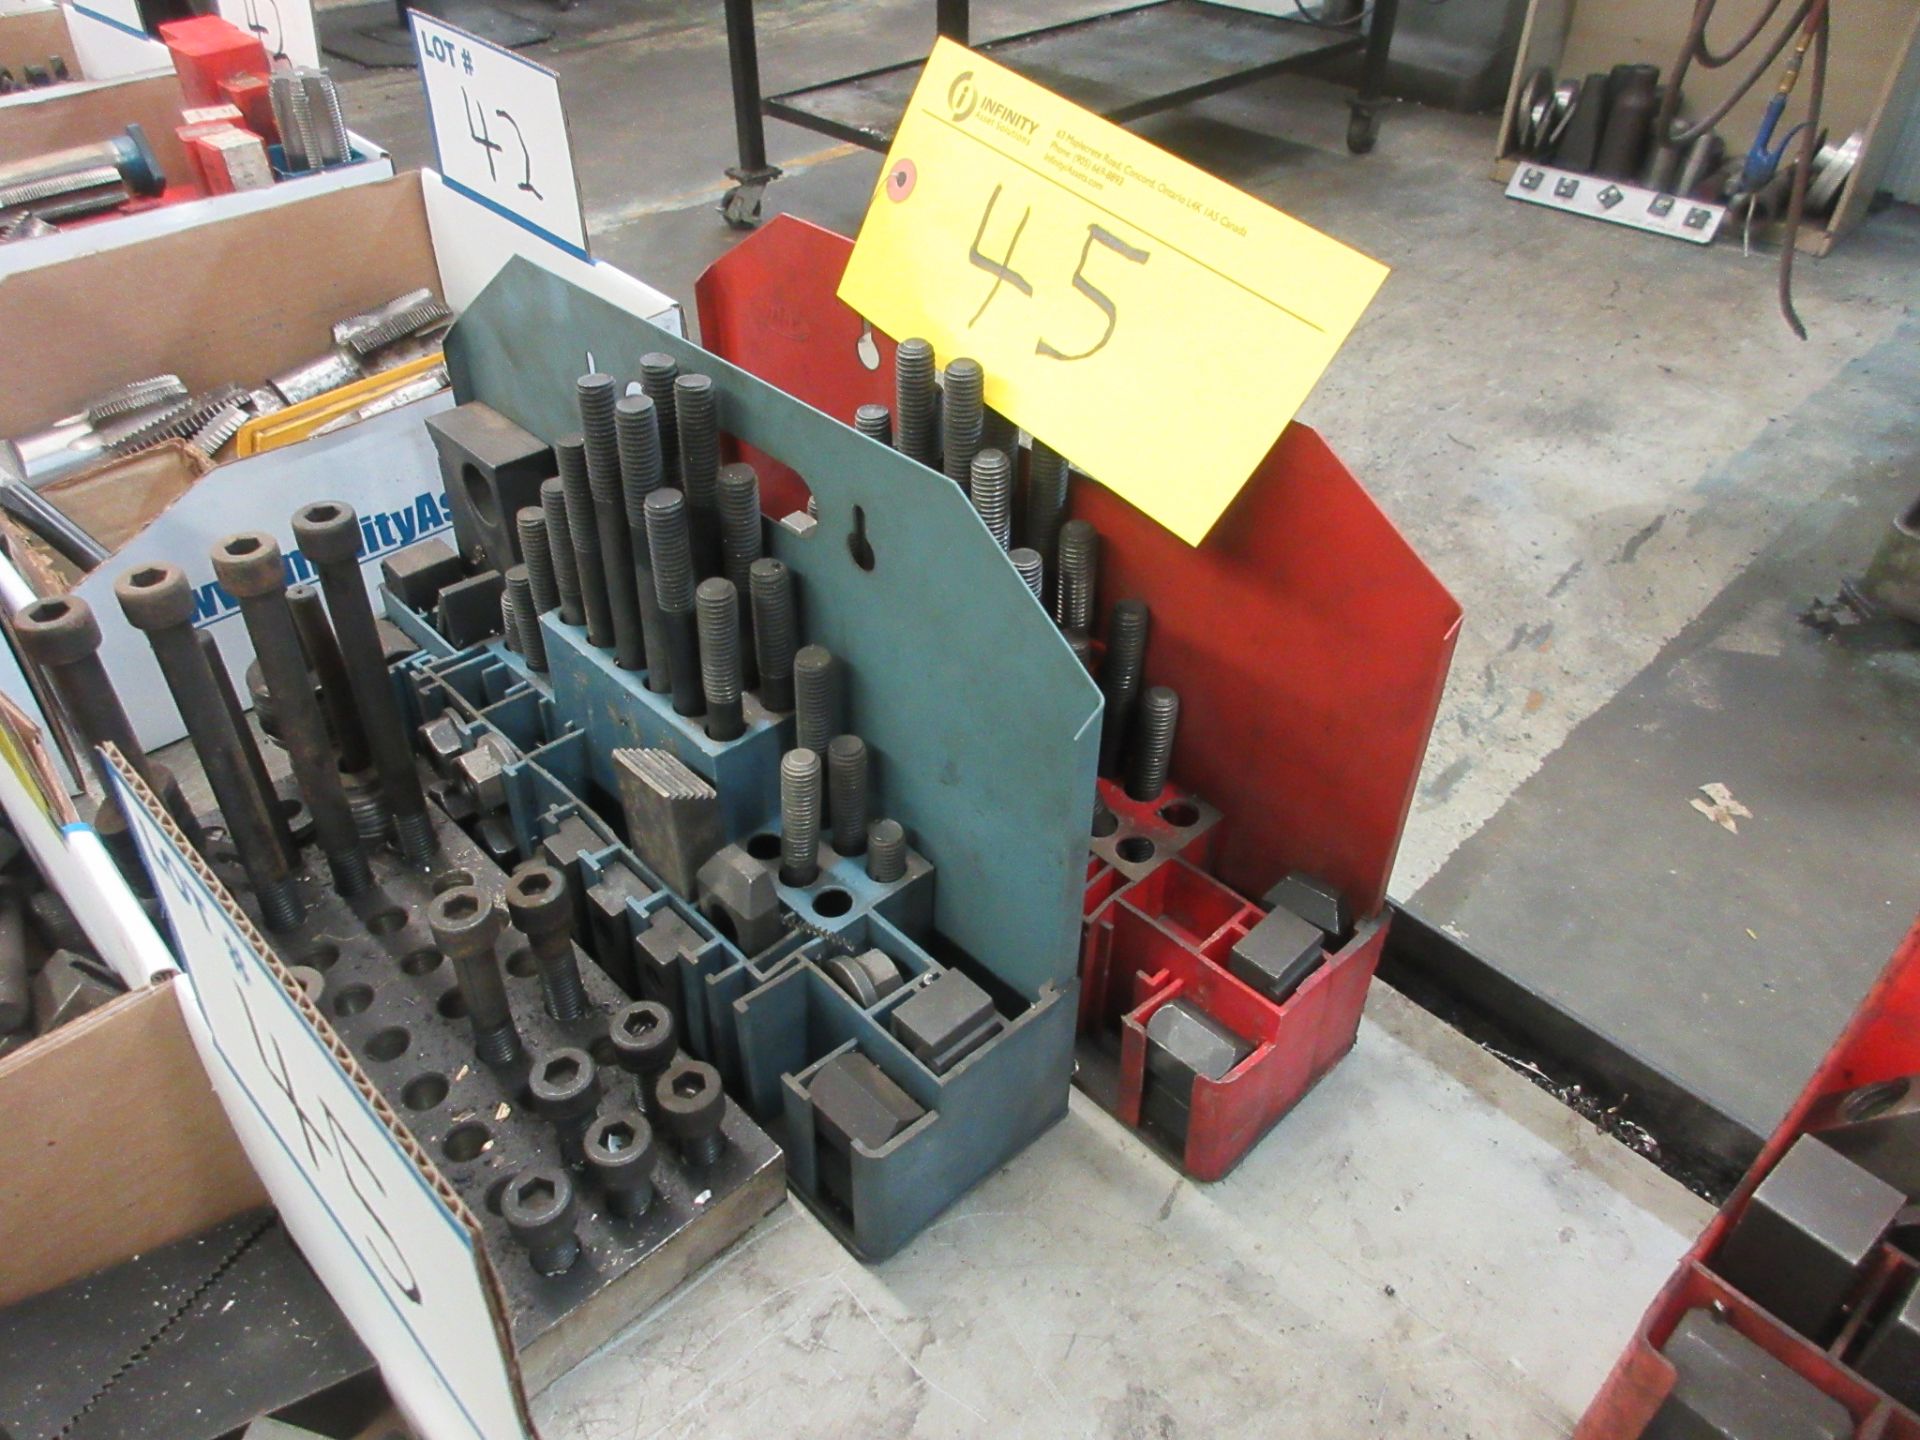 LOT (2) MACHINE SCREW / HOLD DOWN SETS W/ EXTRA BLOCKS, SCREWS AND HEIGHT ADJUSTABLE STANDS - Image 2 of 2